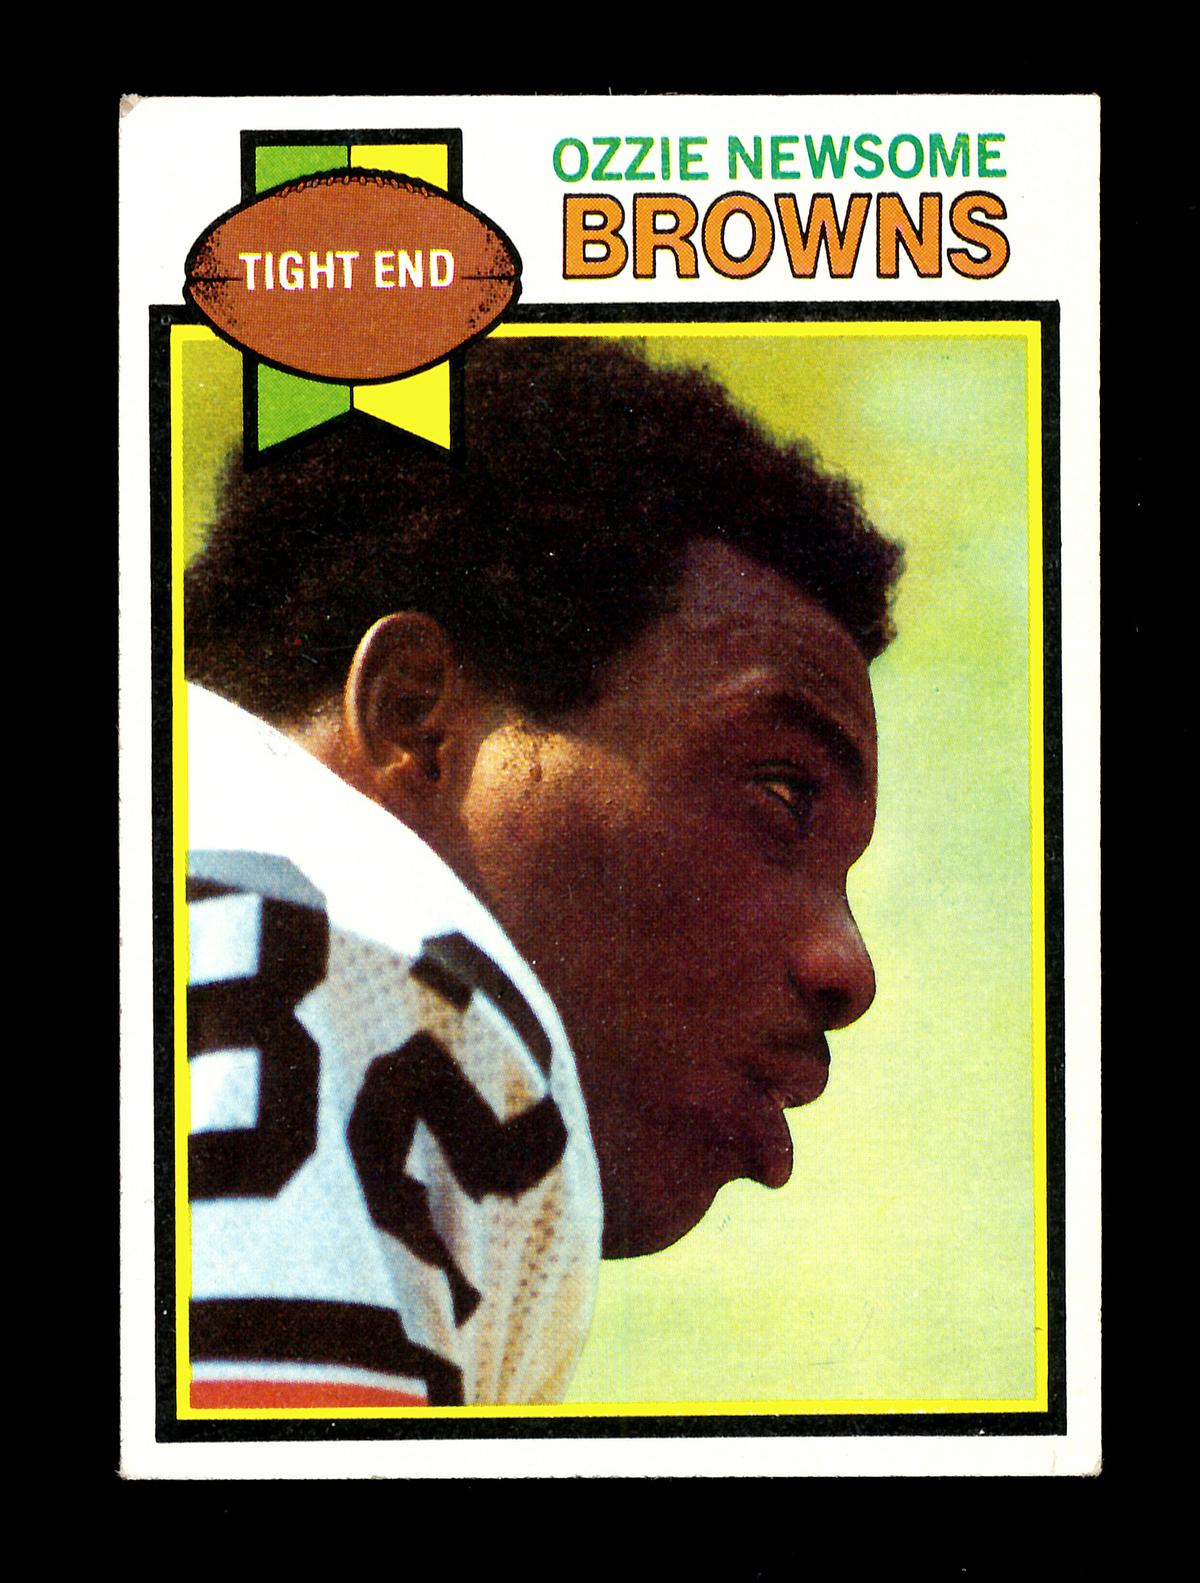 1979 Topps ROOKIE Football Card #308 Rookie Hall of Famer Ozzie Newsome Cle